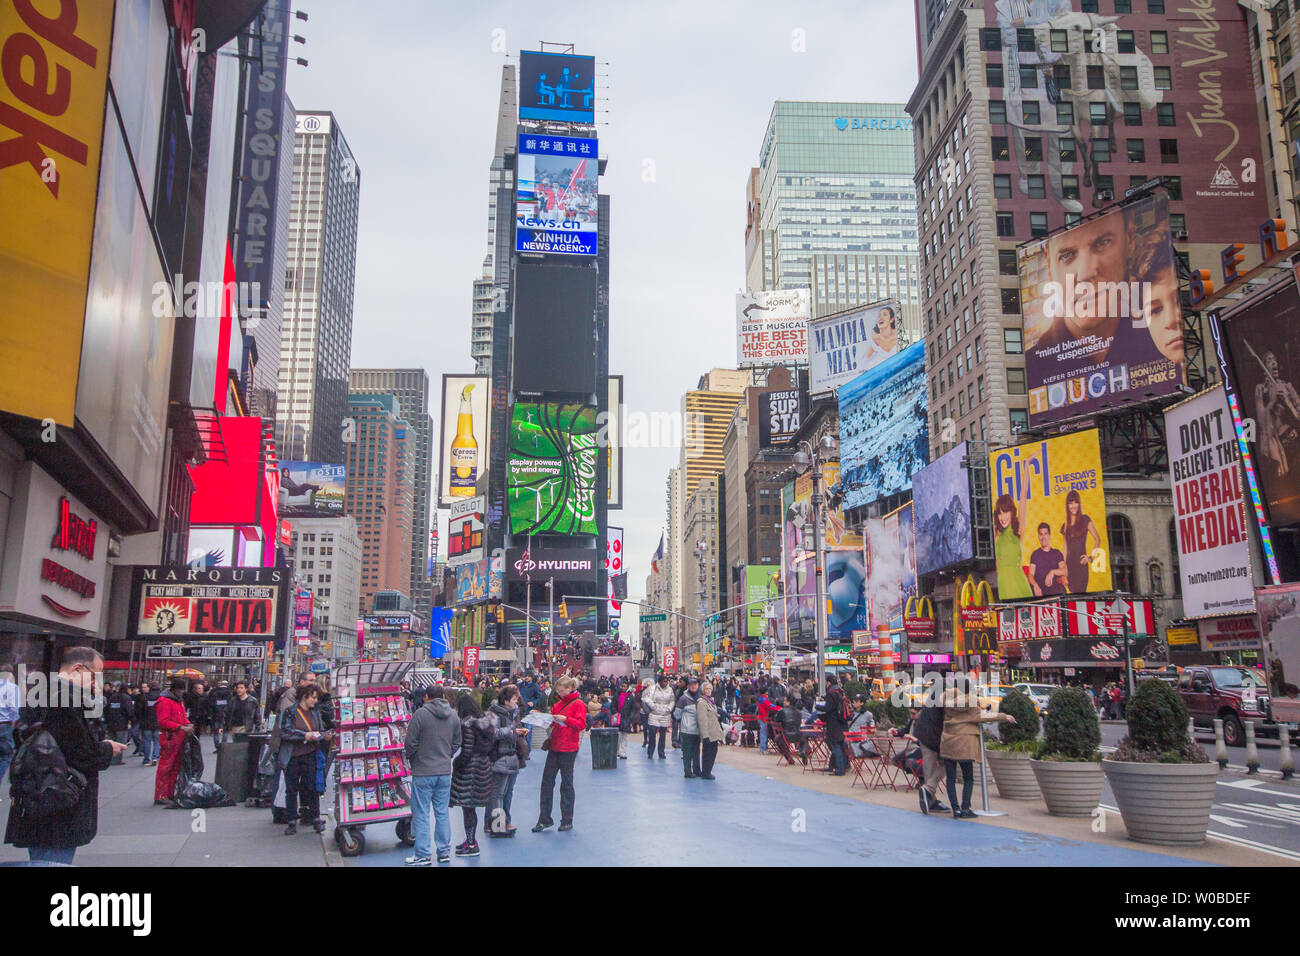 New York City, United States - February 22, 2012: street scene, with busy people walking, at the Times Square region of Manhattan, wide angle showing Stock Photo